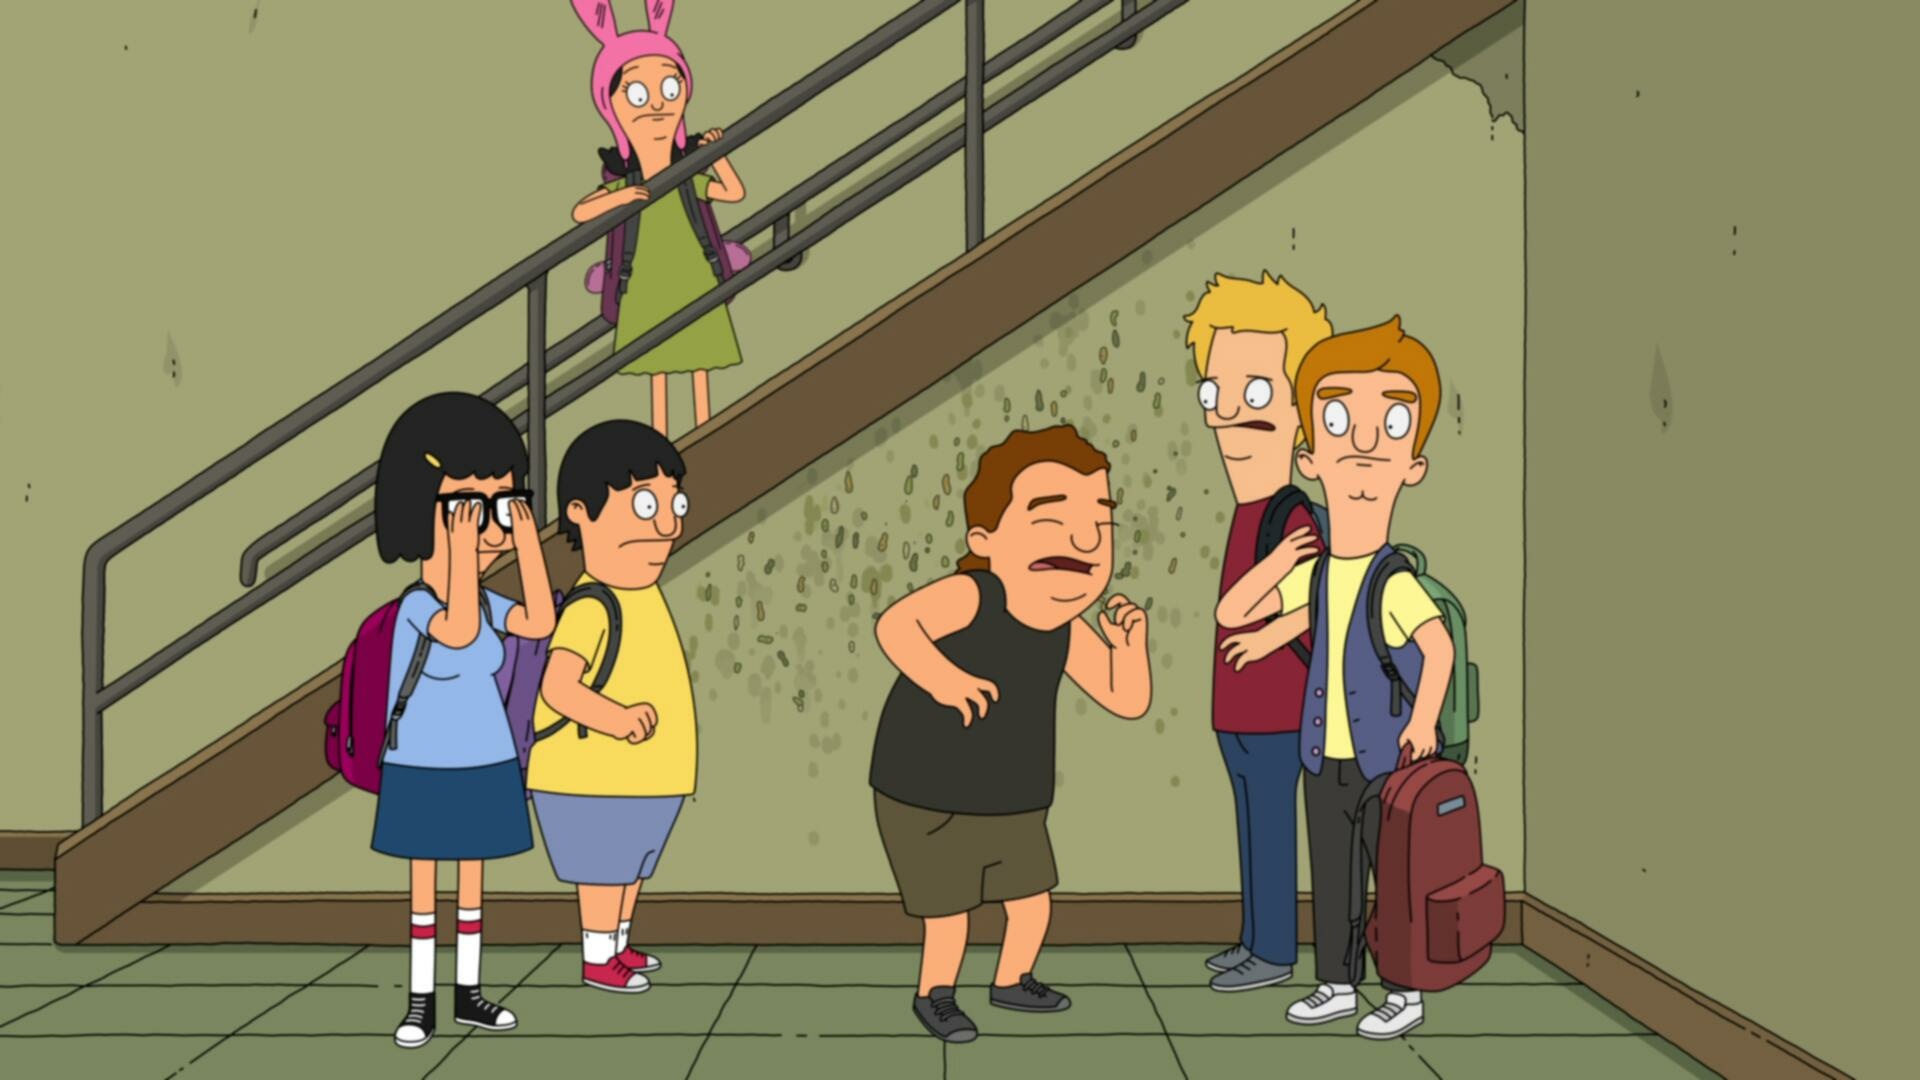 Bobs Burgers S14E05 Bully ieve It or Not 1080p DSNP WEB DL DDP5 1 H 264 NTb TGx